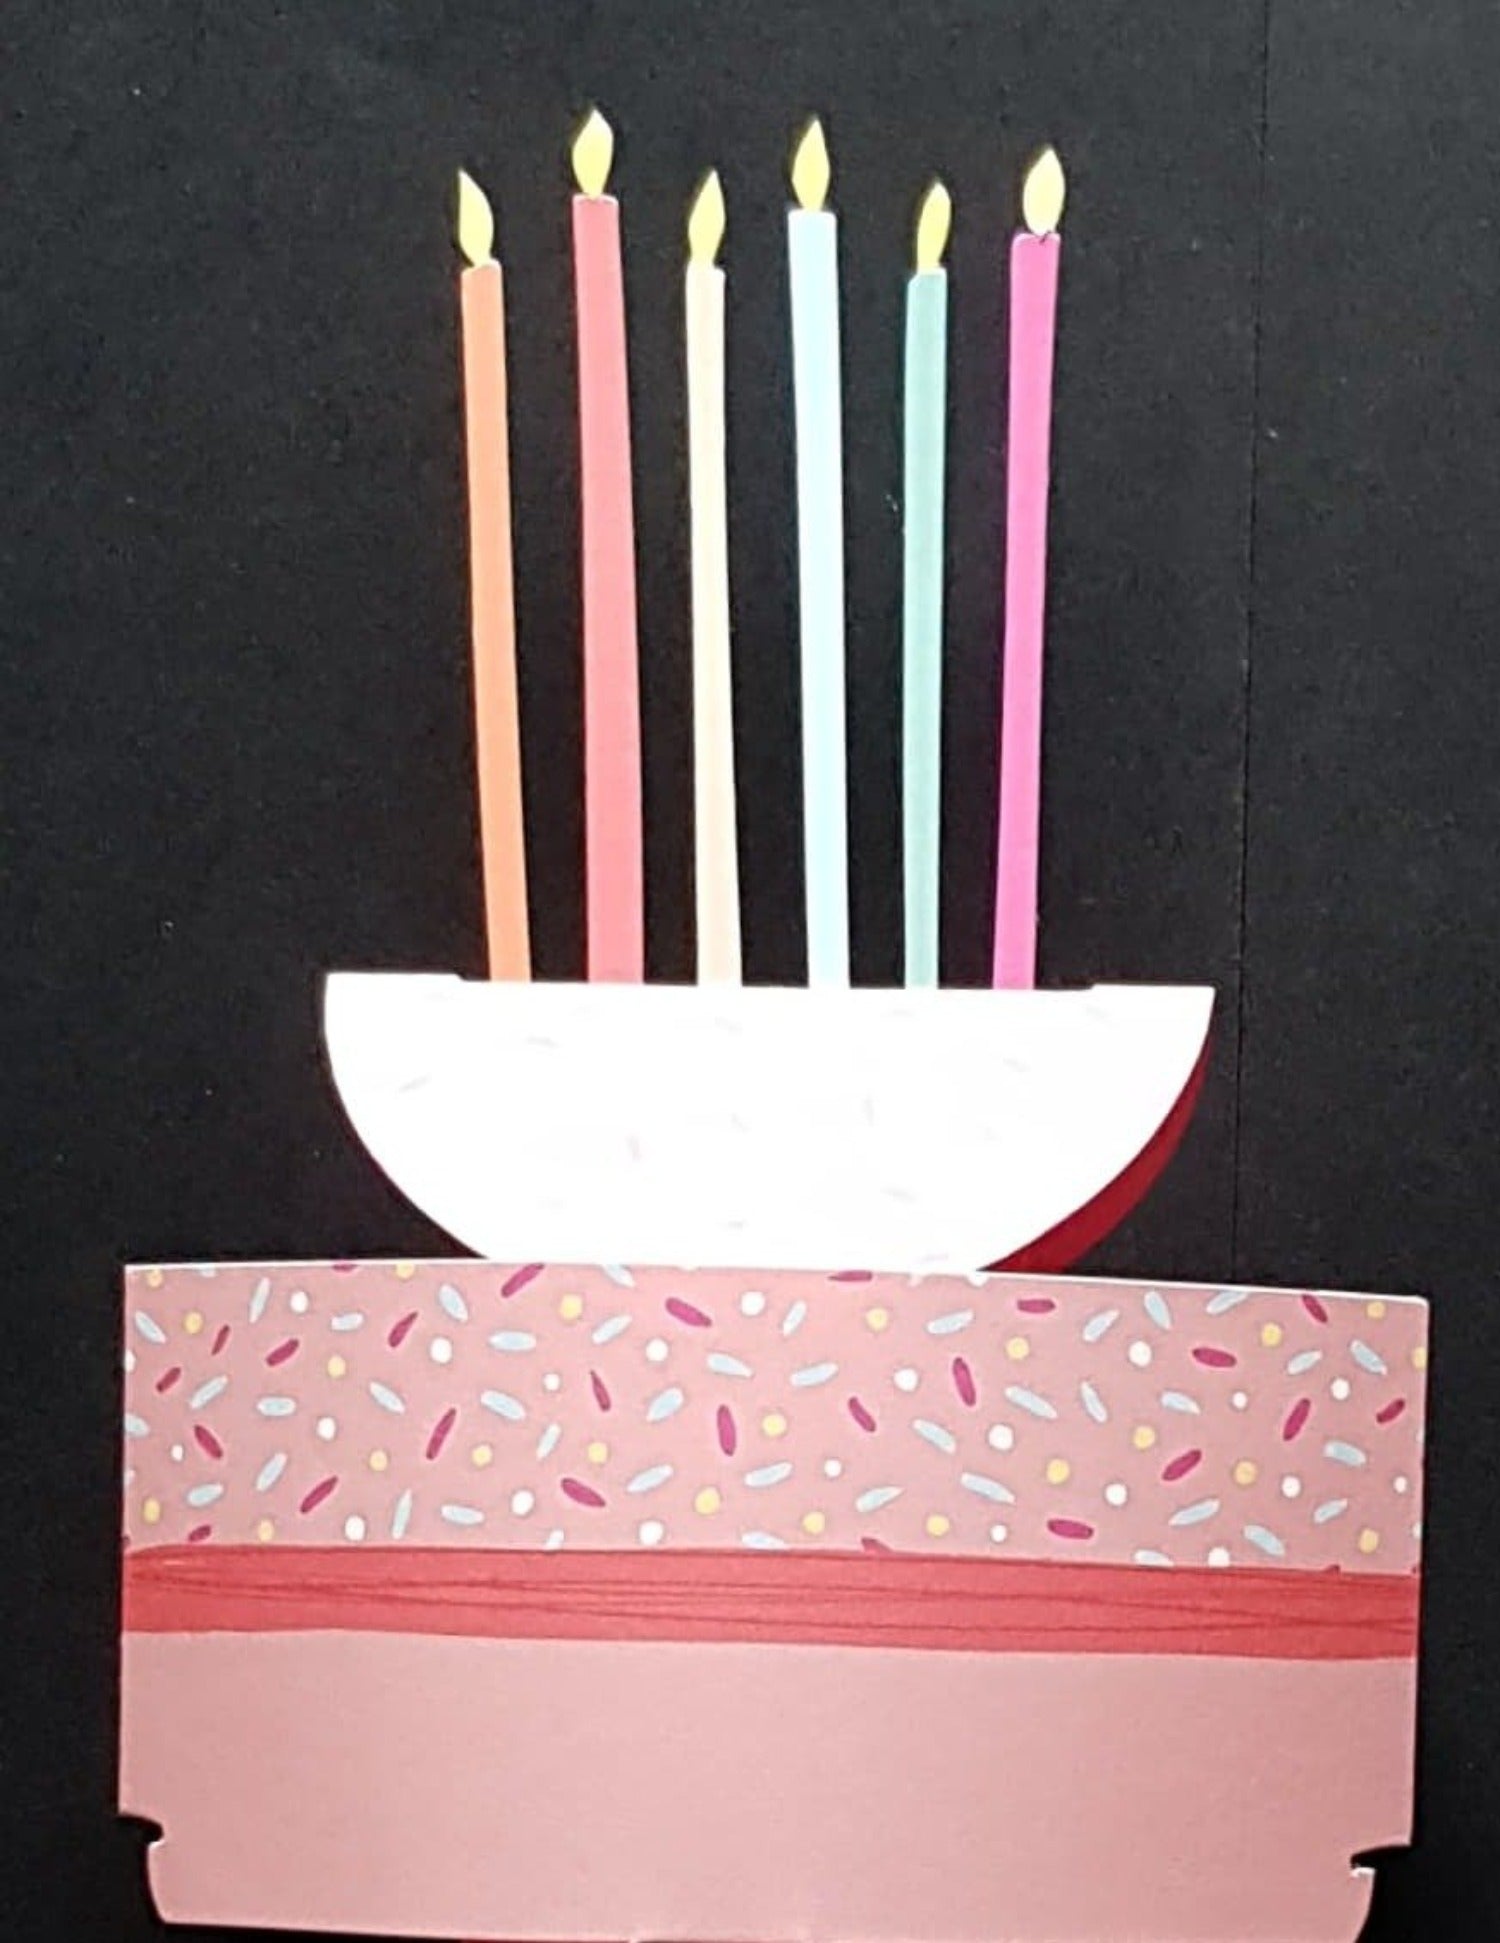 Birthday Card - 'Happy Birthday' Message On A Pink Cake With Candles